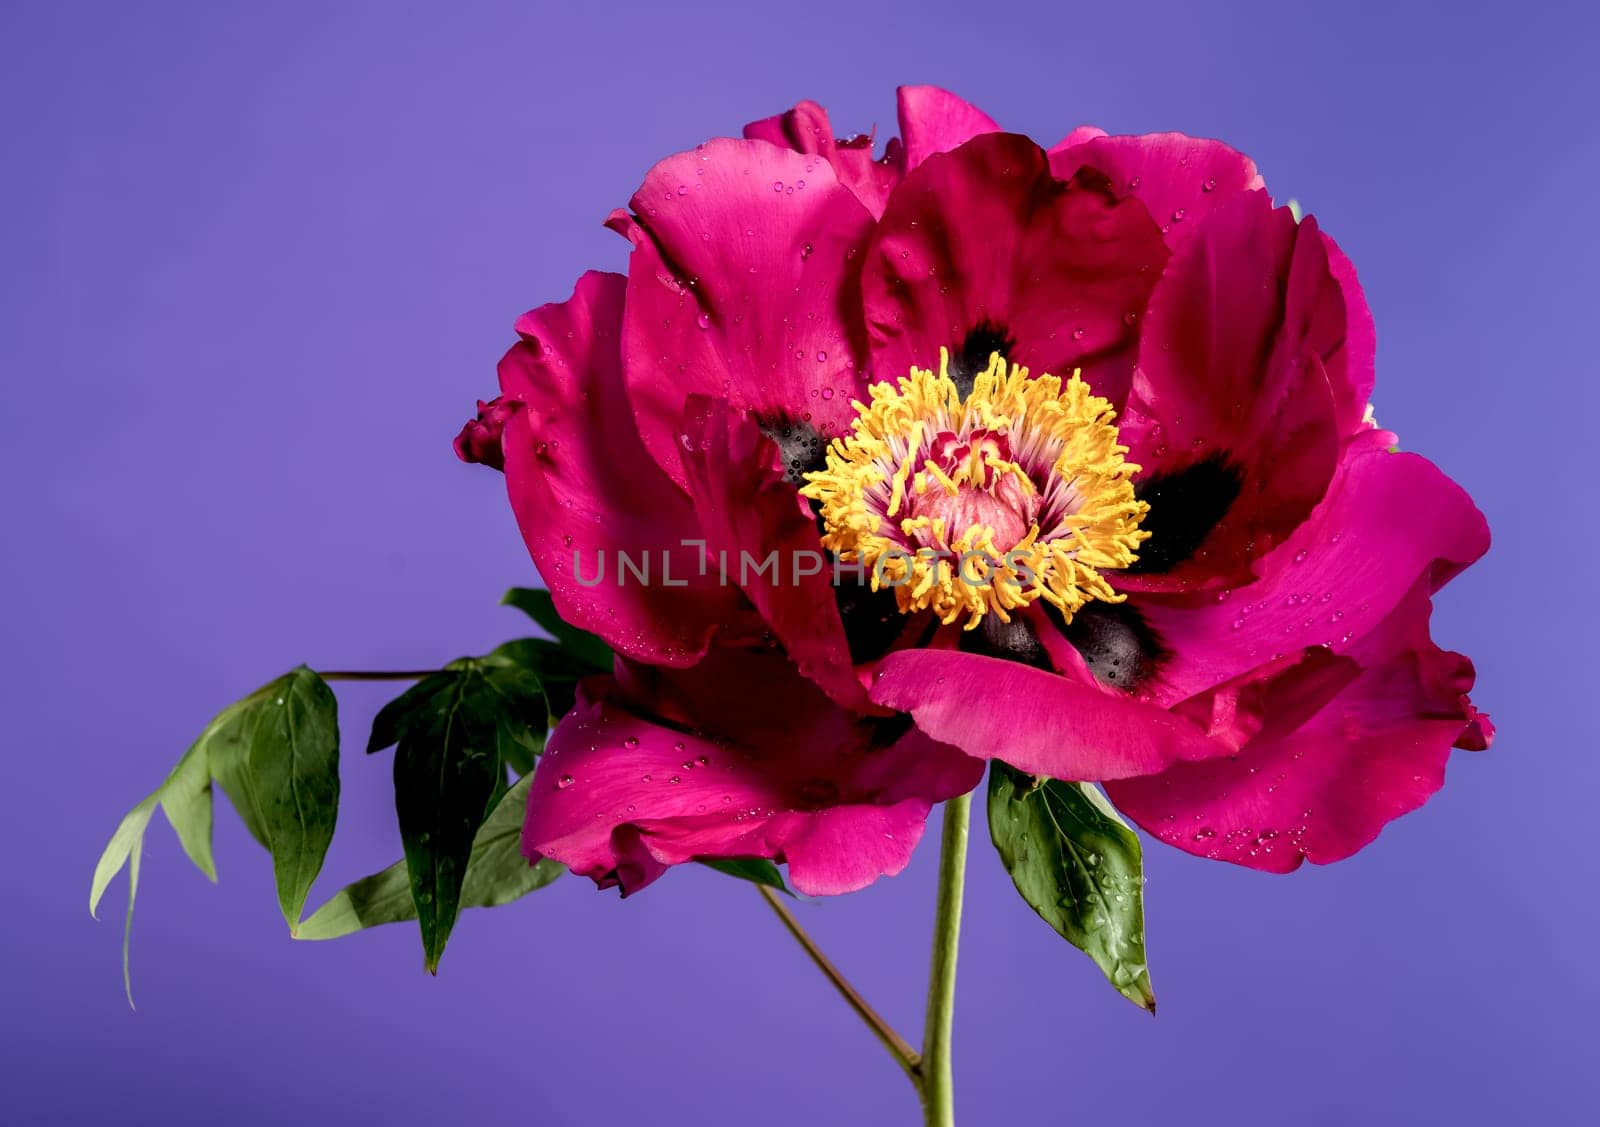 Blooming red peony on a purple background by Multipedia